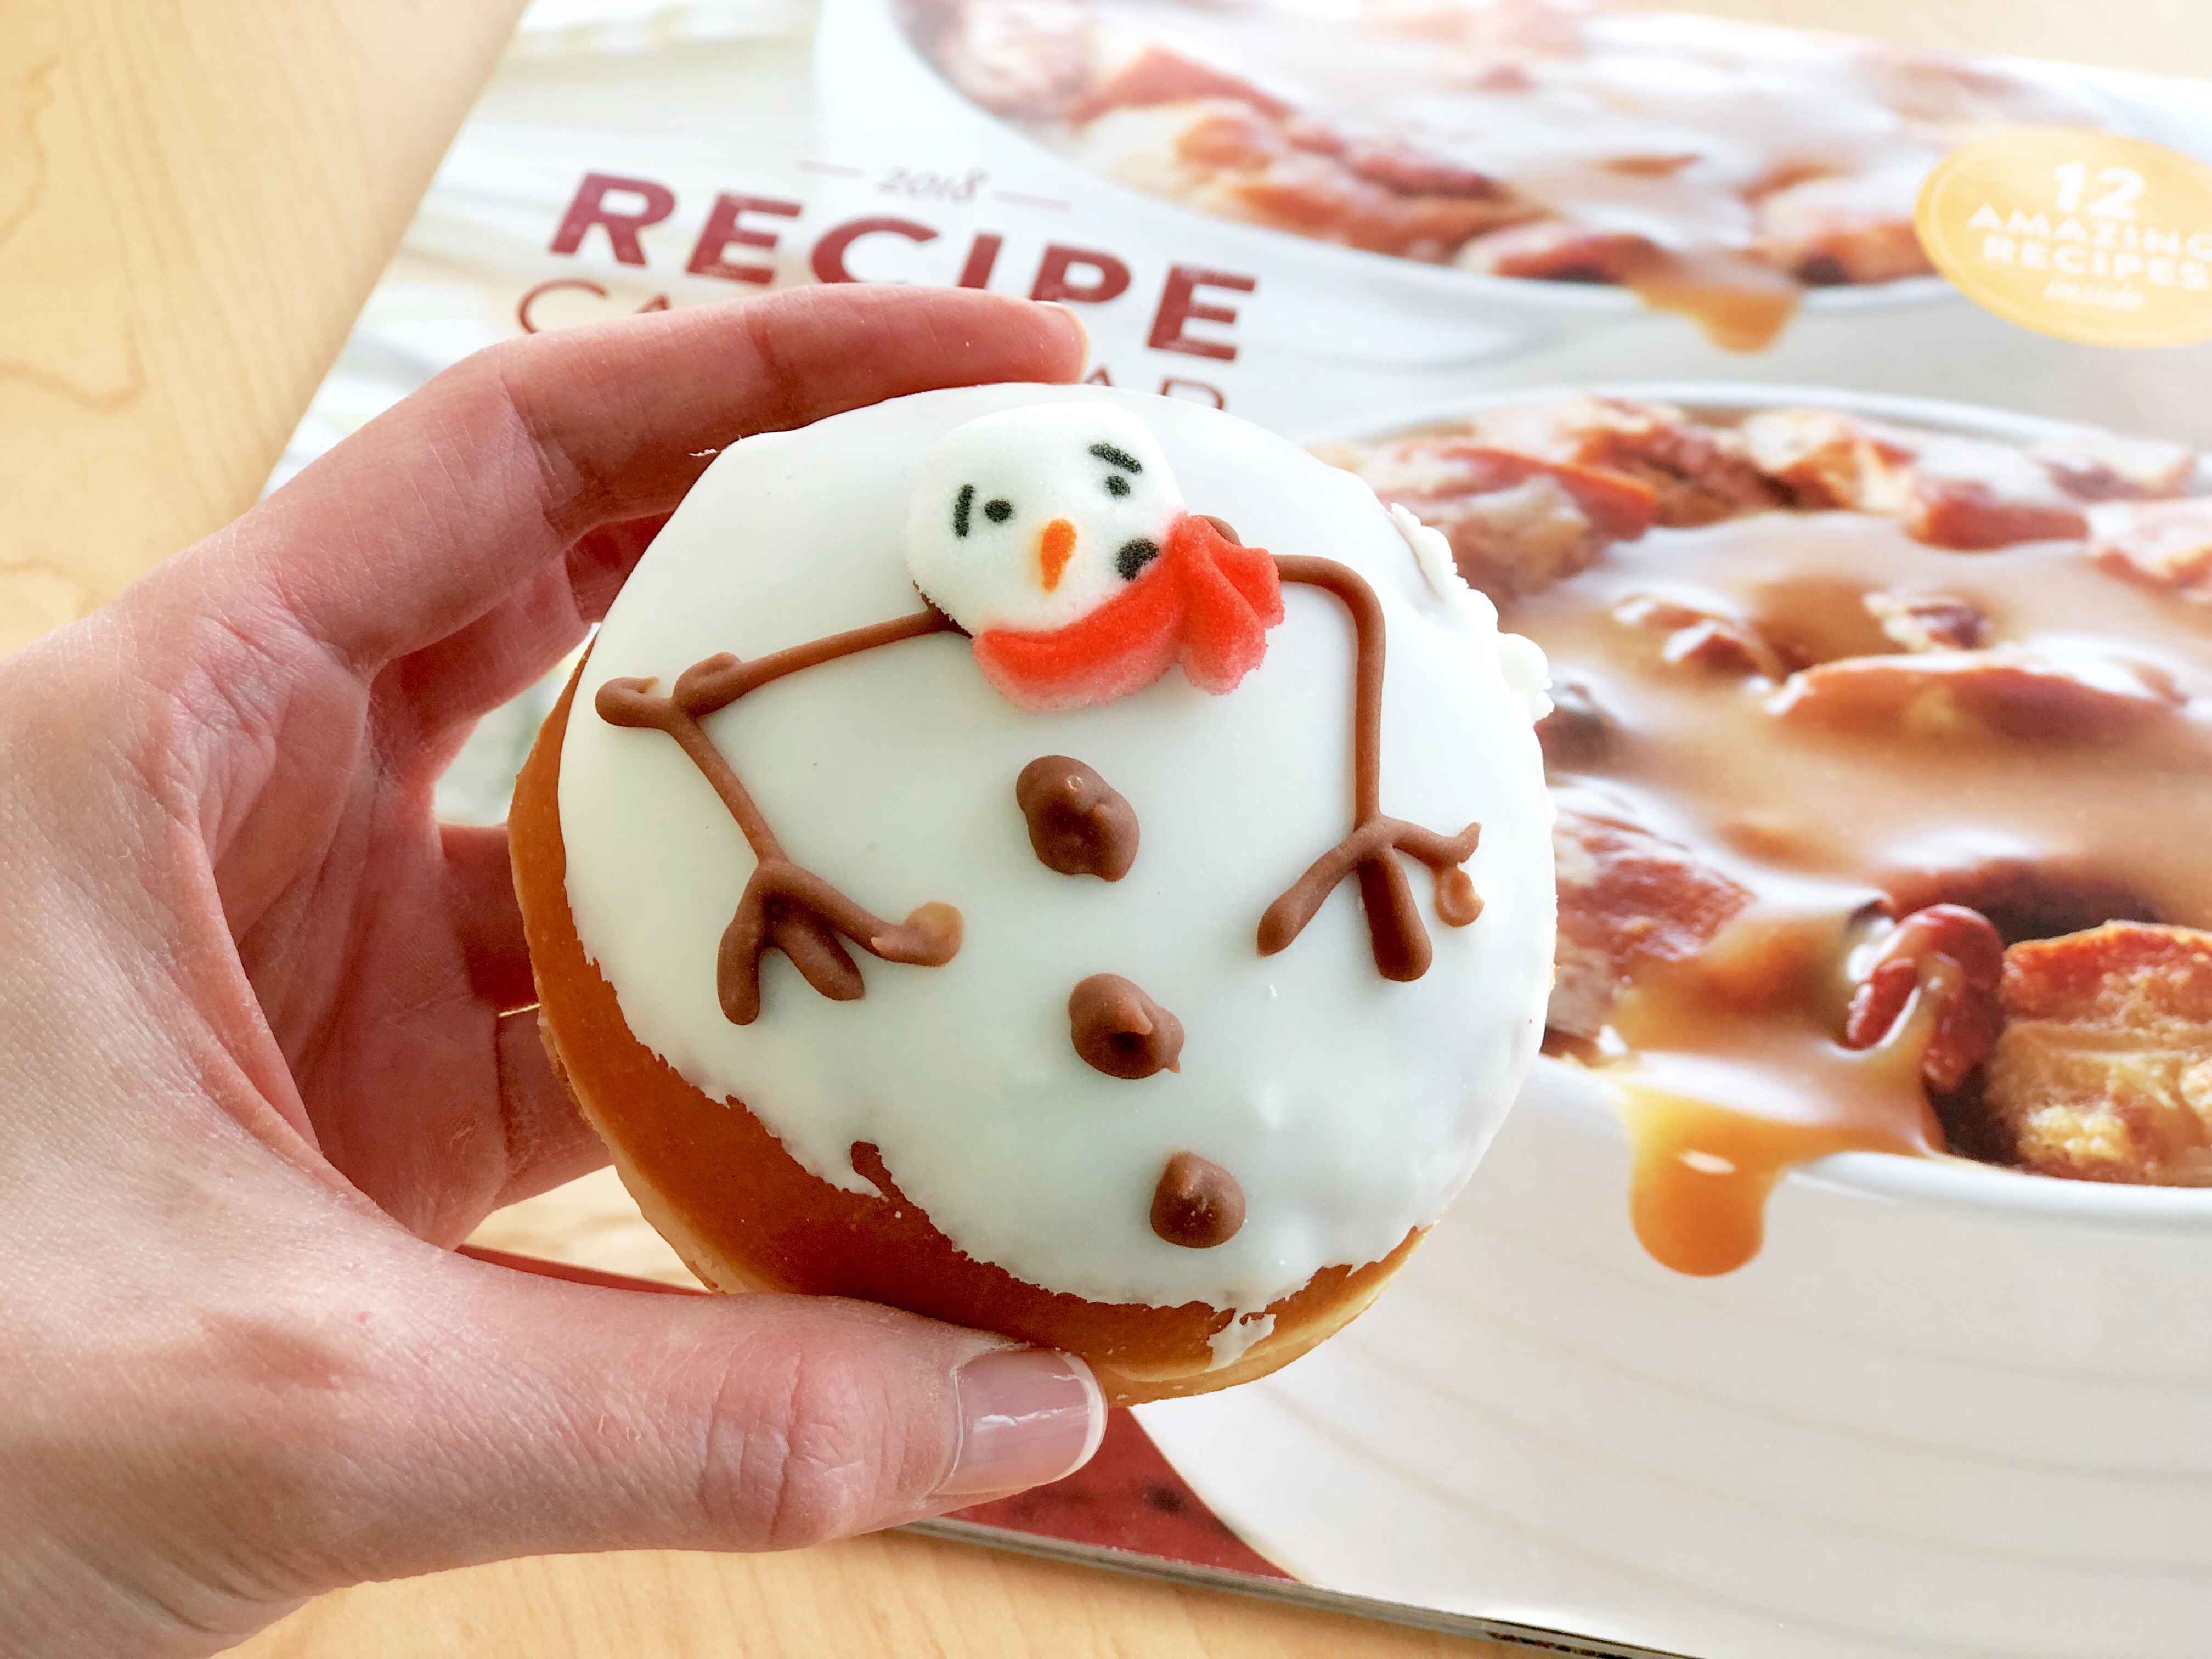 Krispy Kreme 2018 Calendar Available (110+ in Coupons Including Free